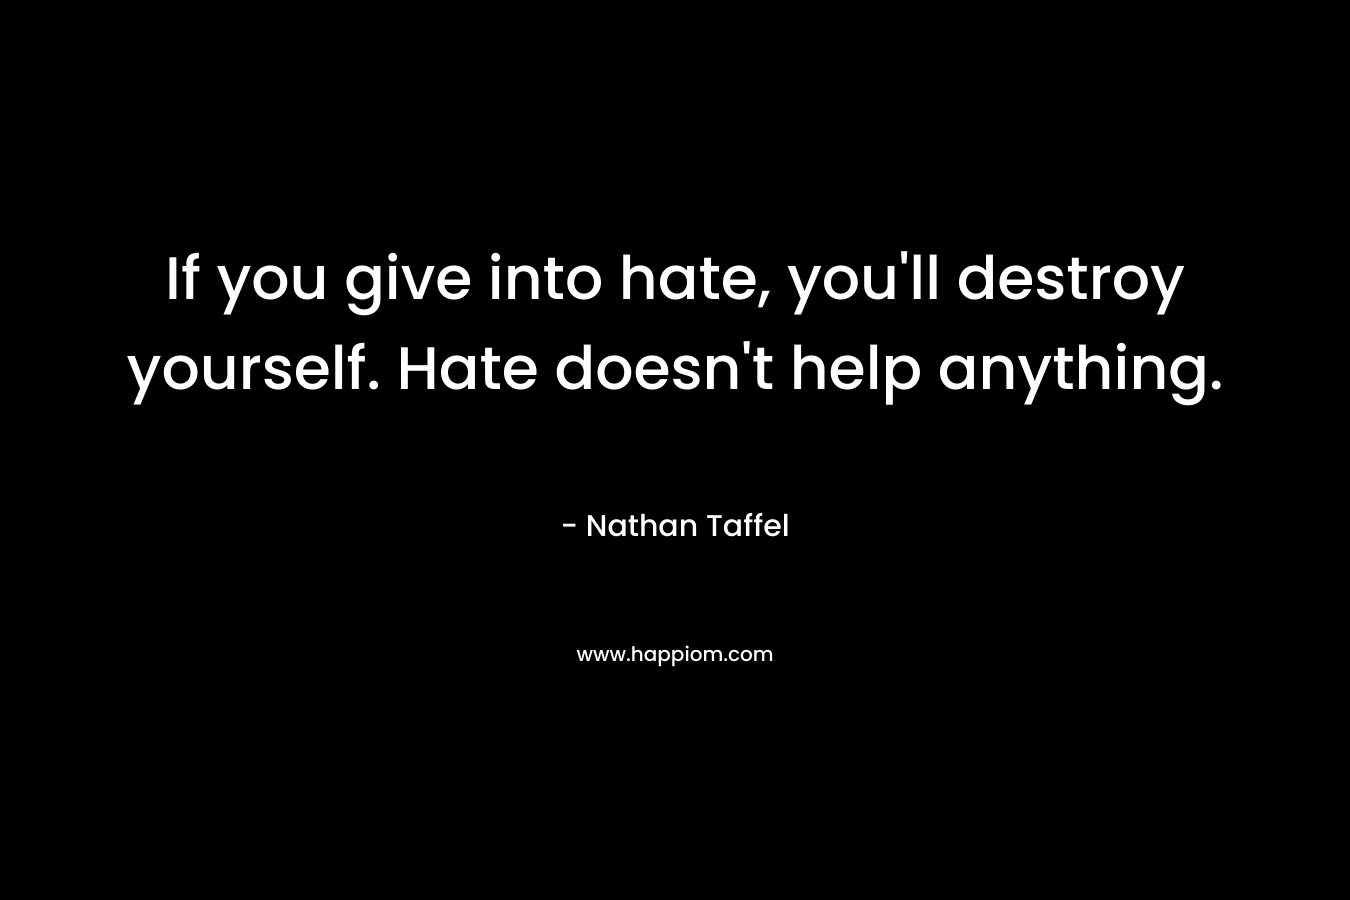 If you give into hate, you’ll destroy yourself. Hate doesn’t help anything. – Nathan Taffel